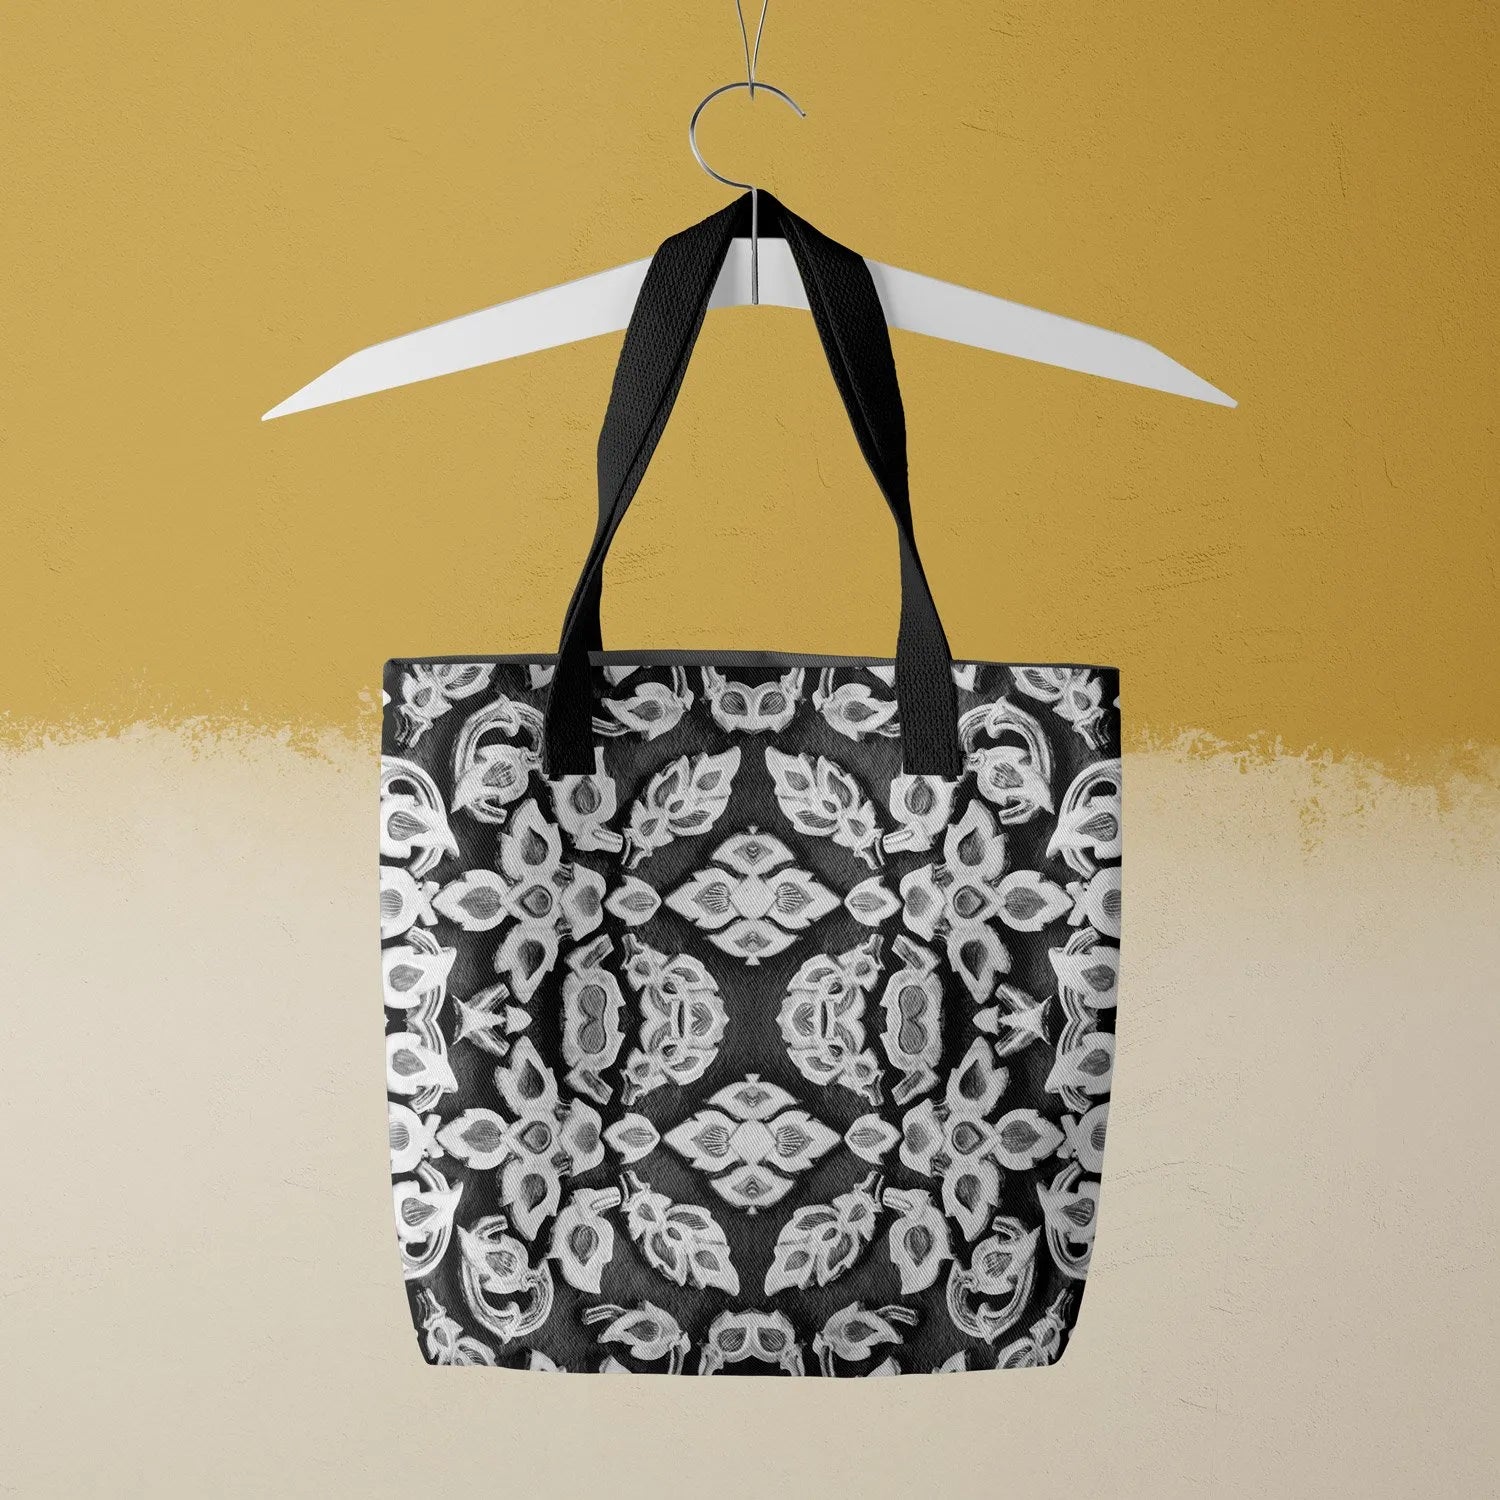 Entering Ayodhya Tote - Black And White - Heavy Duty Reusable Grocery Bag - Black Handles - Shopping Totes - Aesthetic